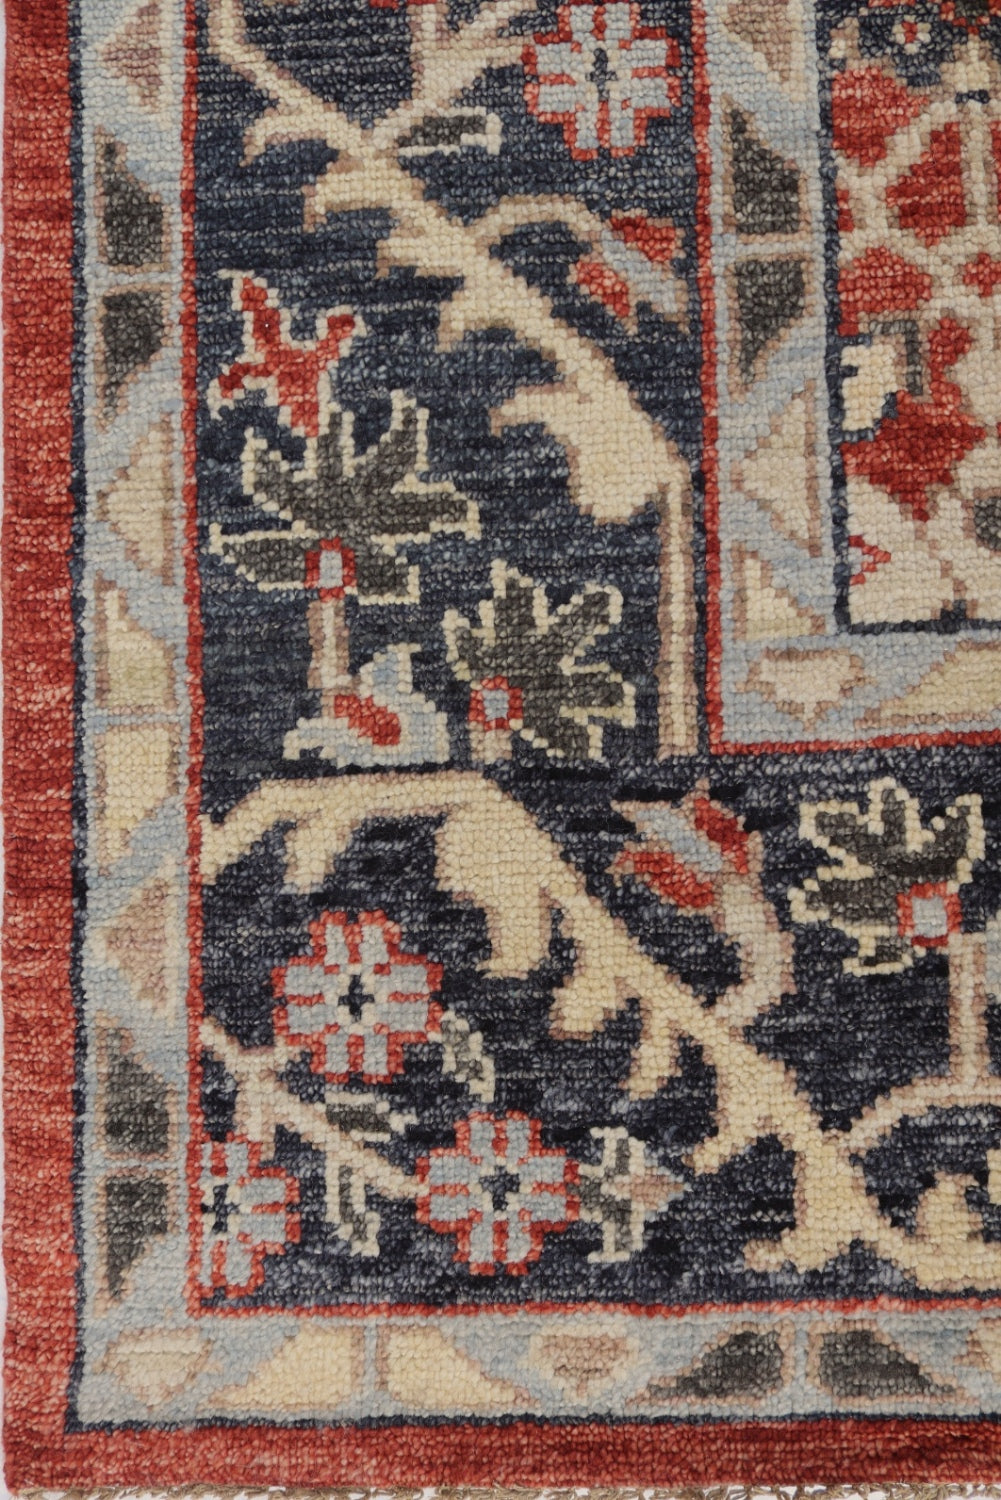 Sultanabad 2 Handwoven Traditional Rug, J71646